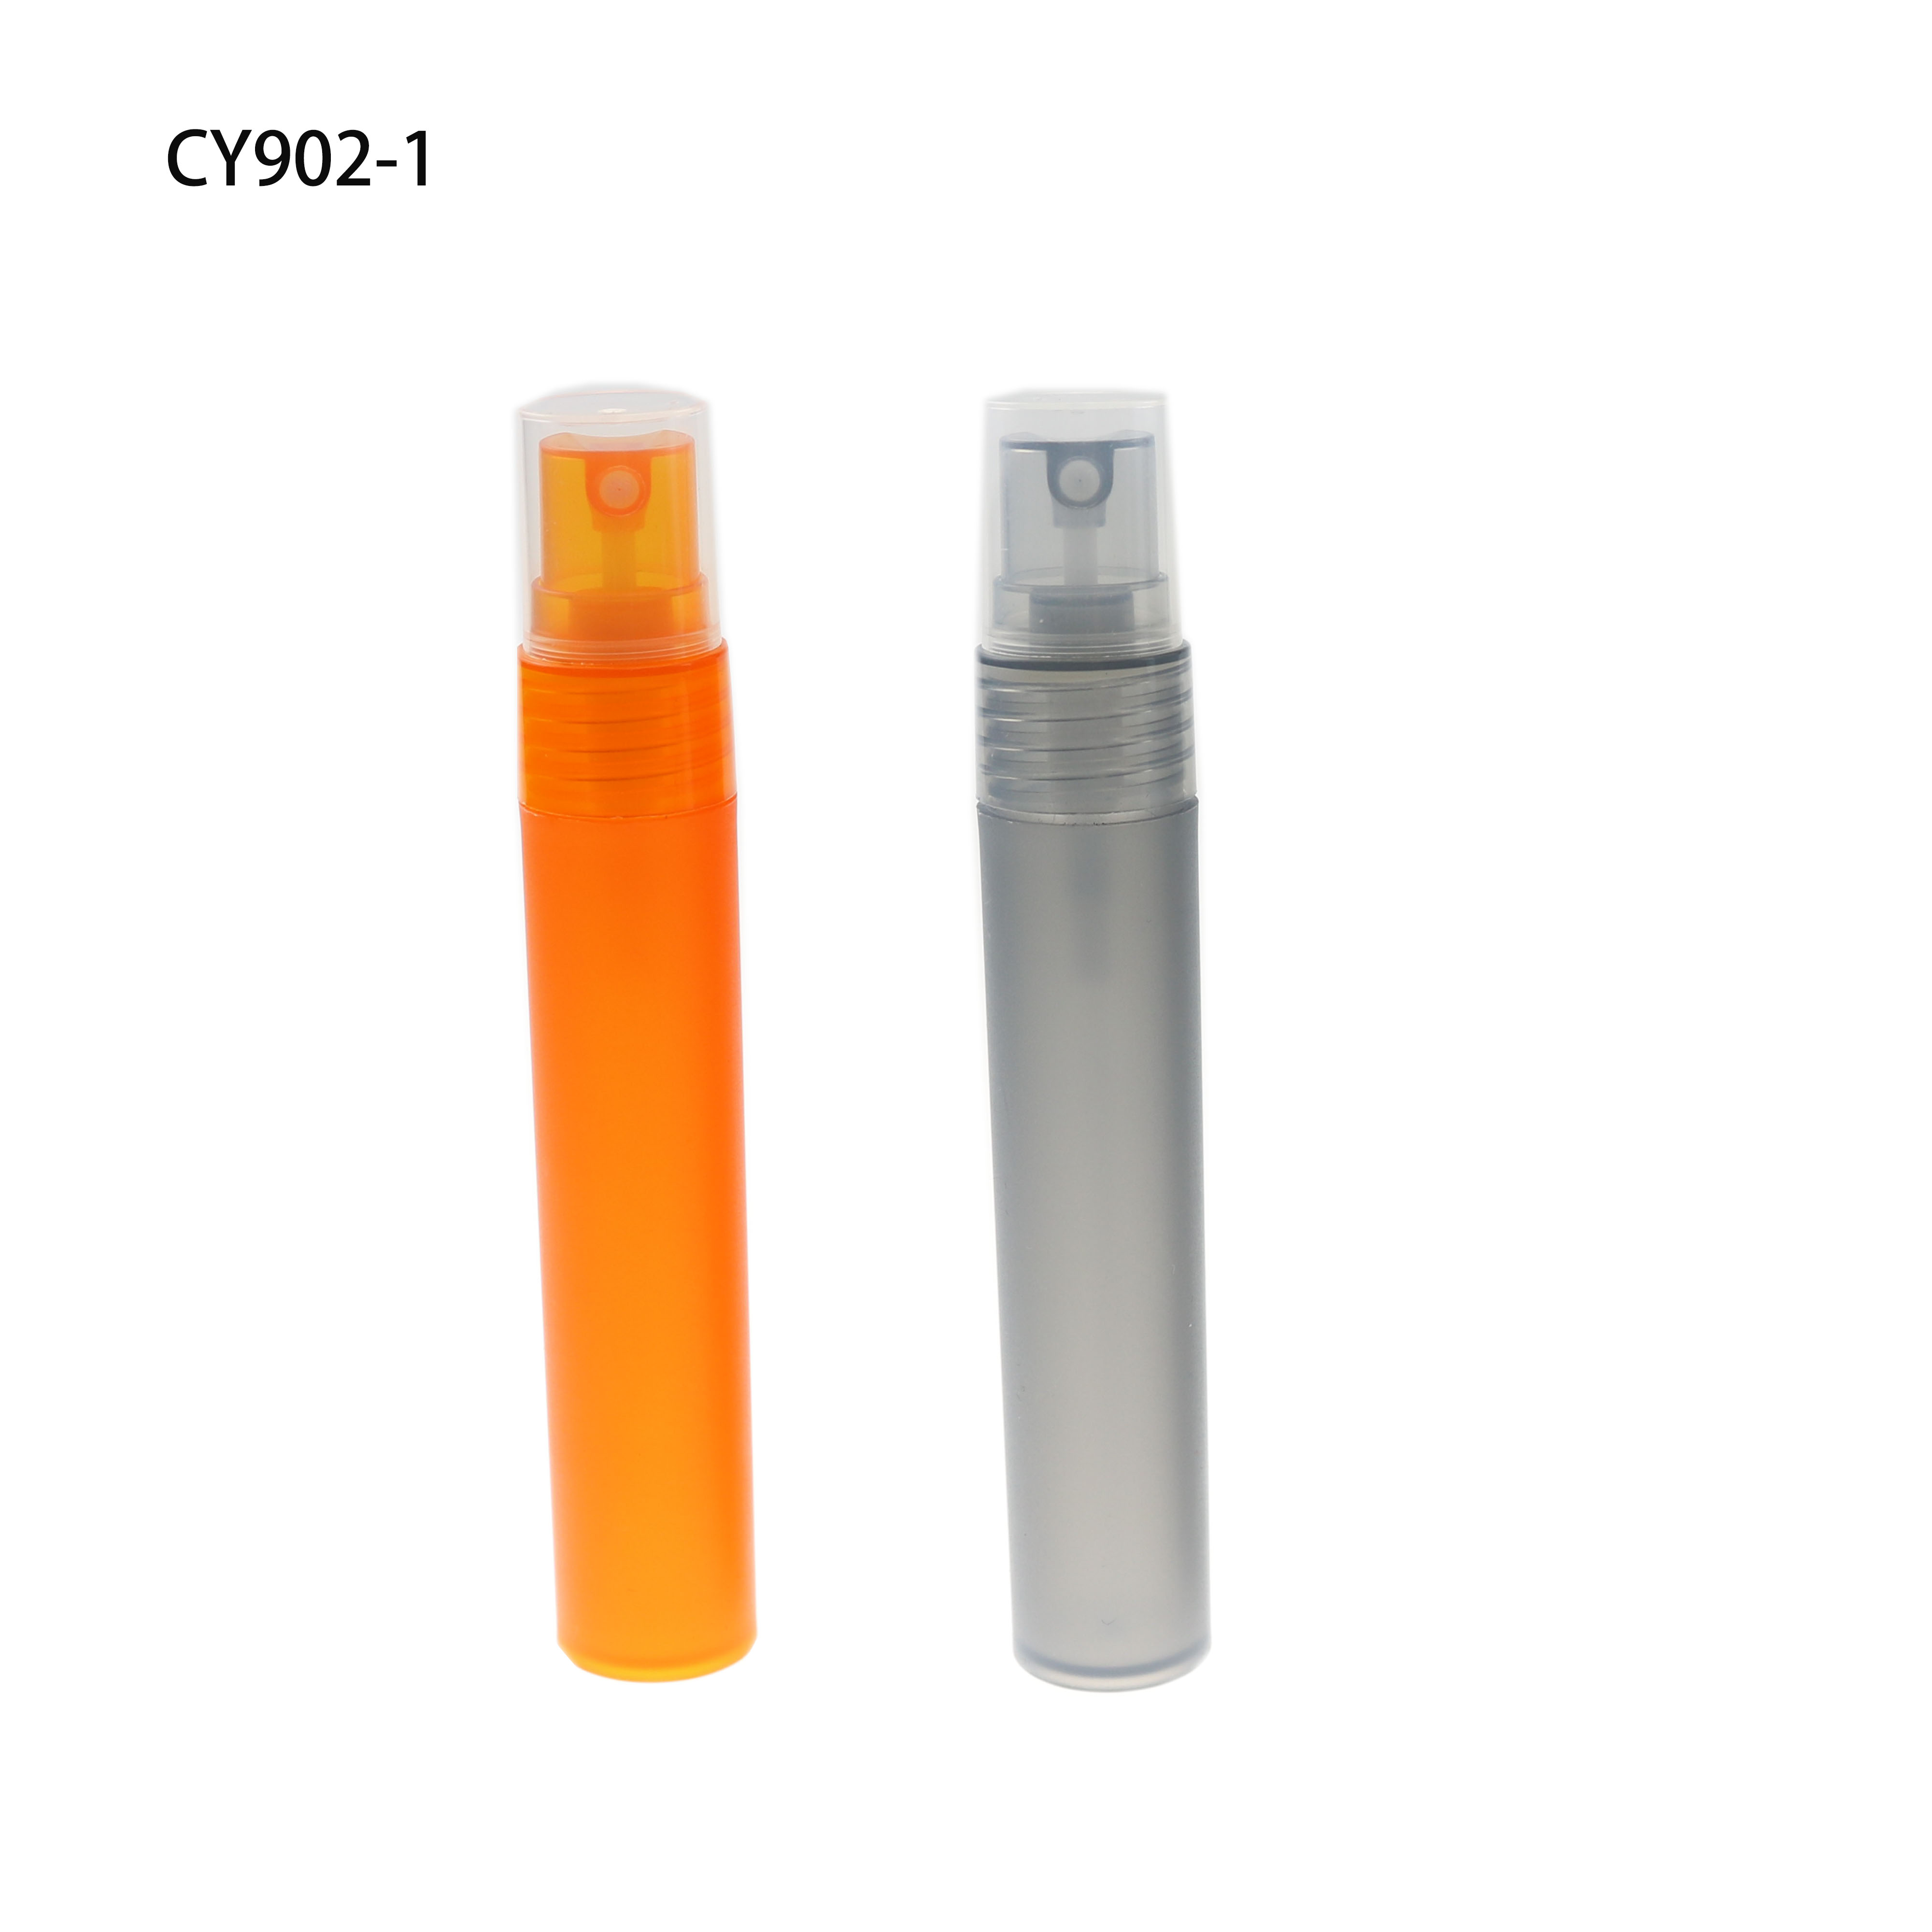 Frosted Plastic Tube Empty Refillable Perfume Bottles Spray for Travel and Gift,Mini Portable pen